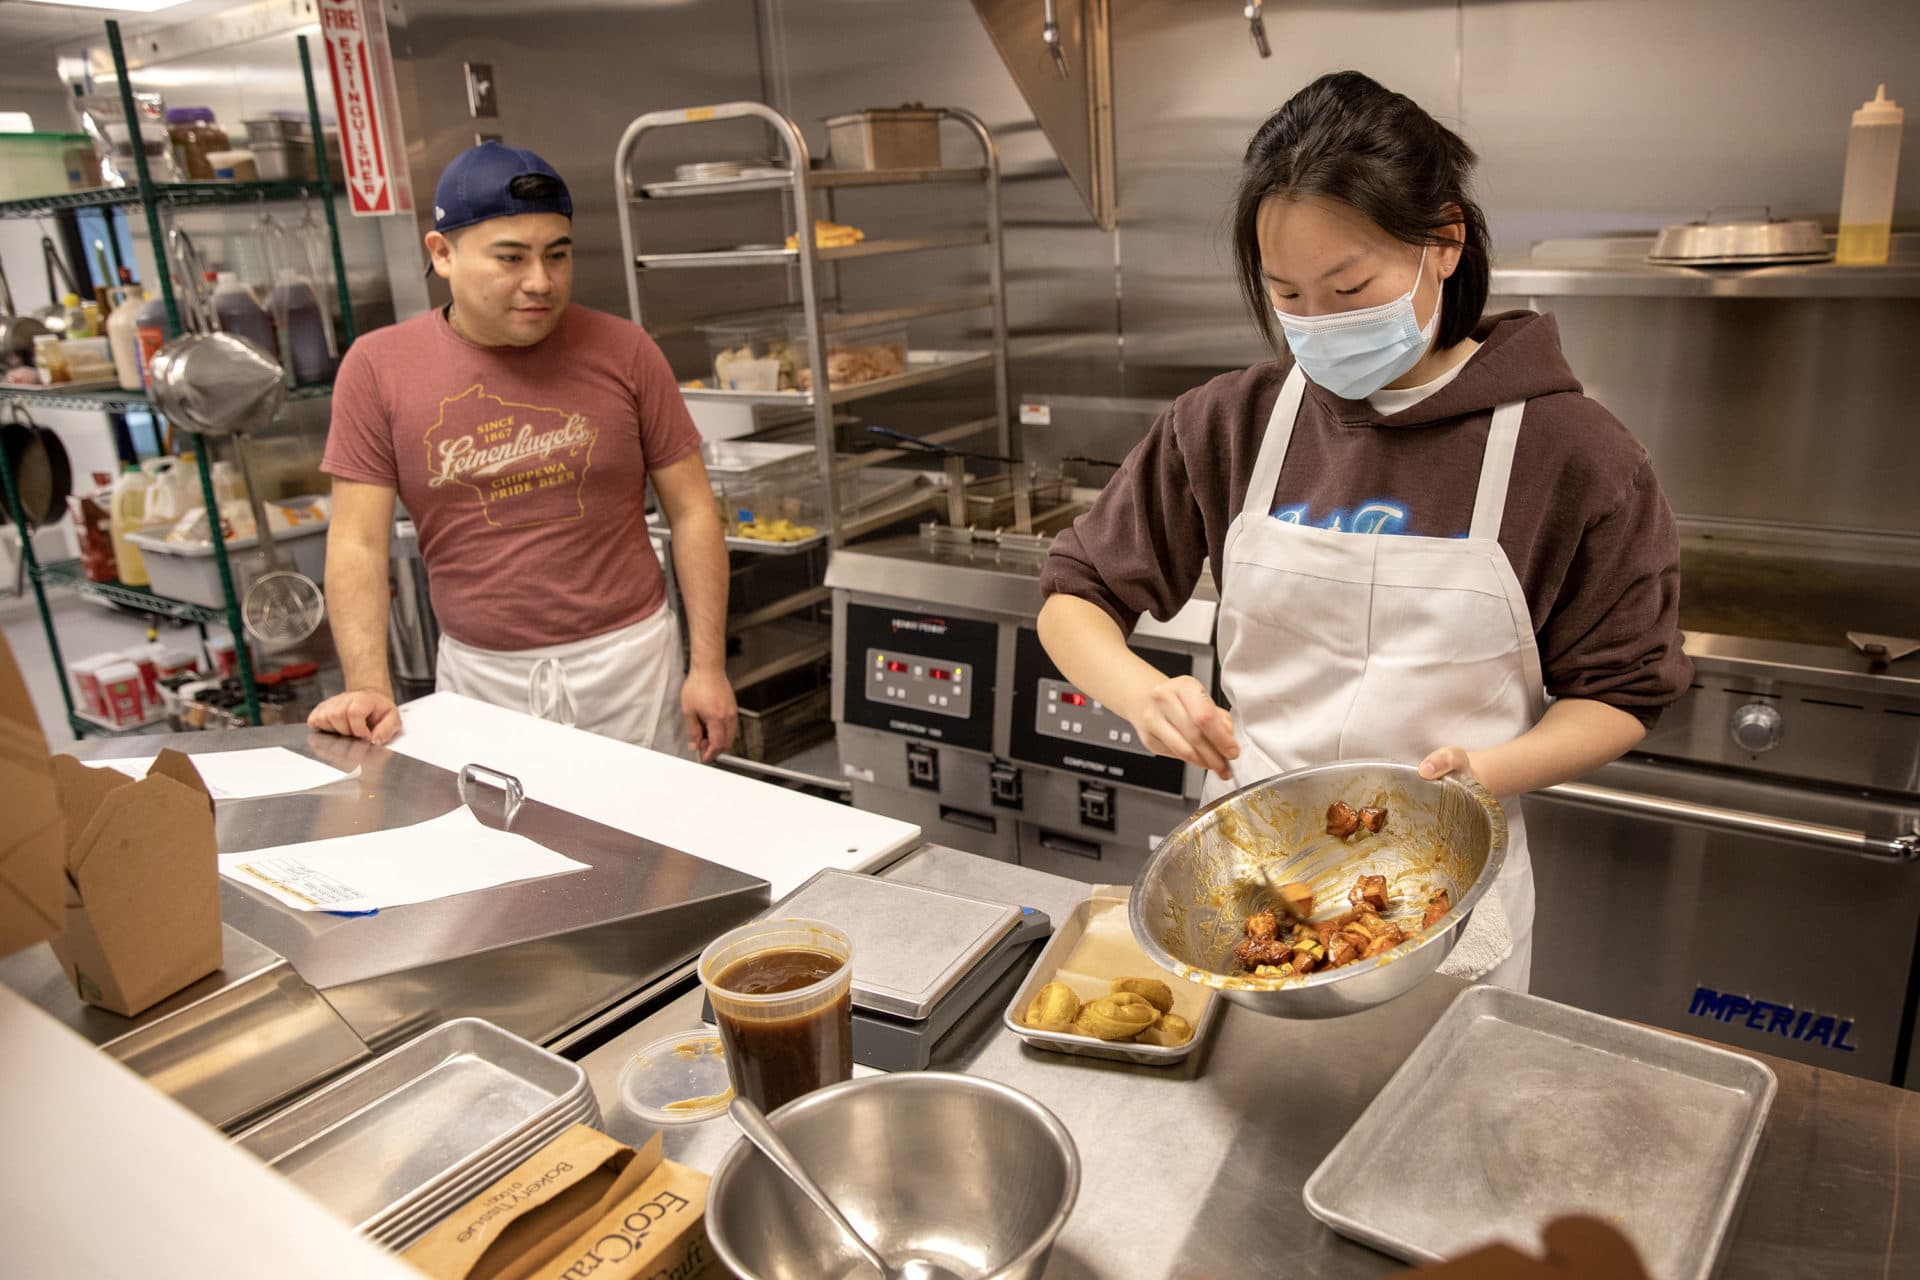 Line cooks Walter Perez and Libby Jelley work on orders in the kitchen at Mei Mei Dumpling Factory and Cafe. (Robin Lubbock/WBUR)